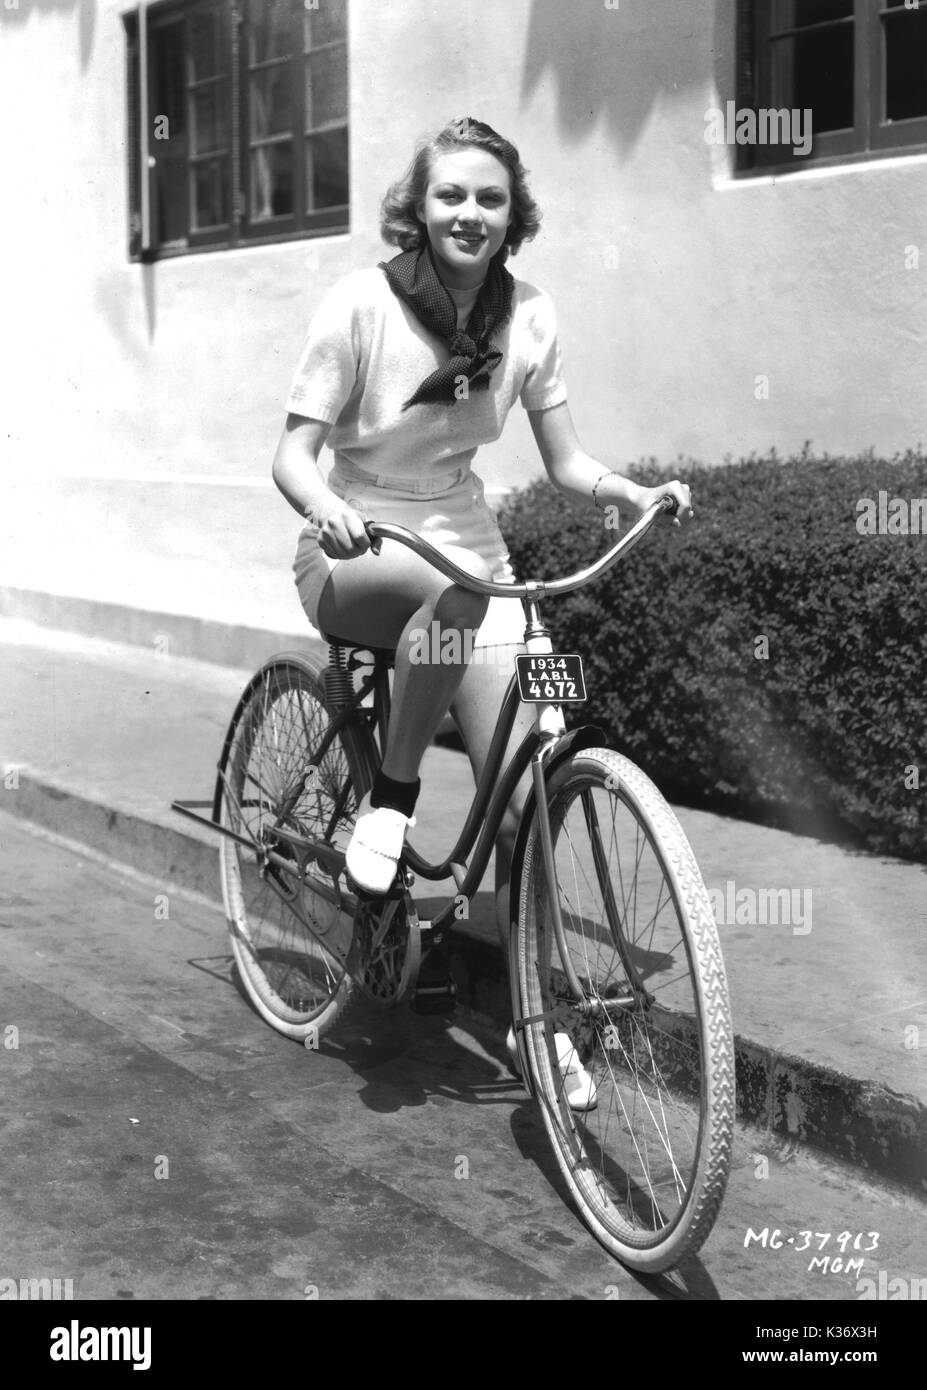 JEAN HOWARD ACTRESS BICYCLE 1930s NUMBER PLATE / LICENCE PLATE Stock Photo  - Alamy